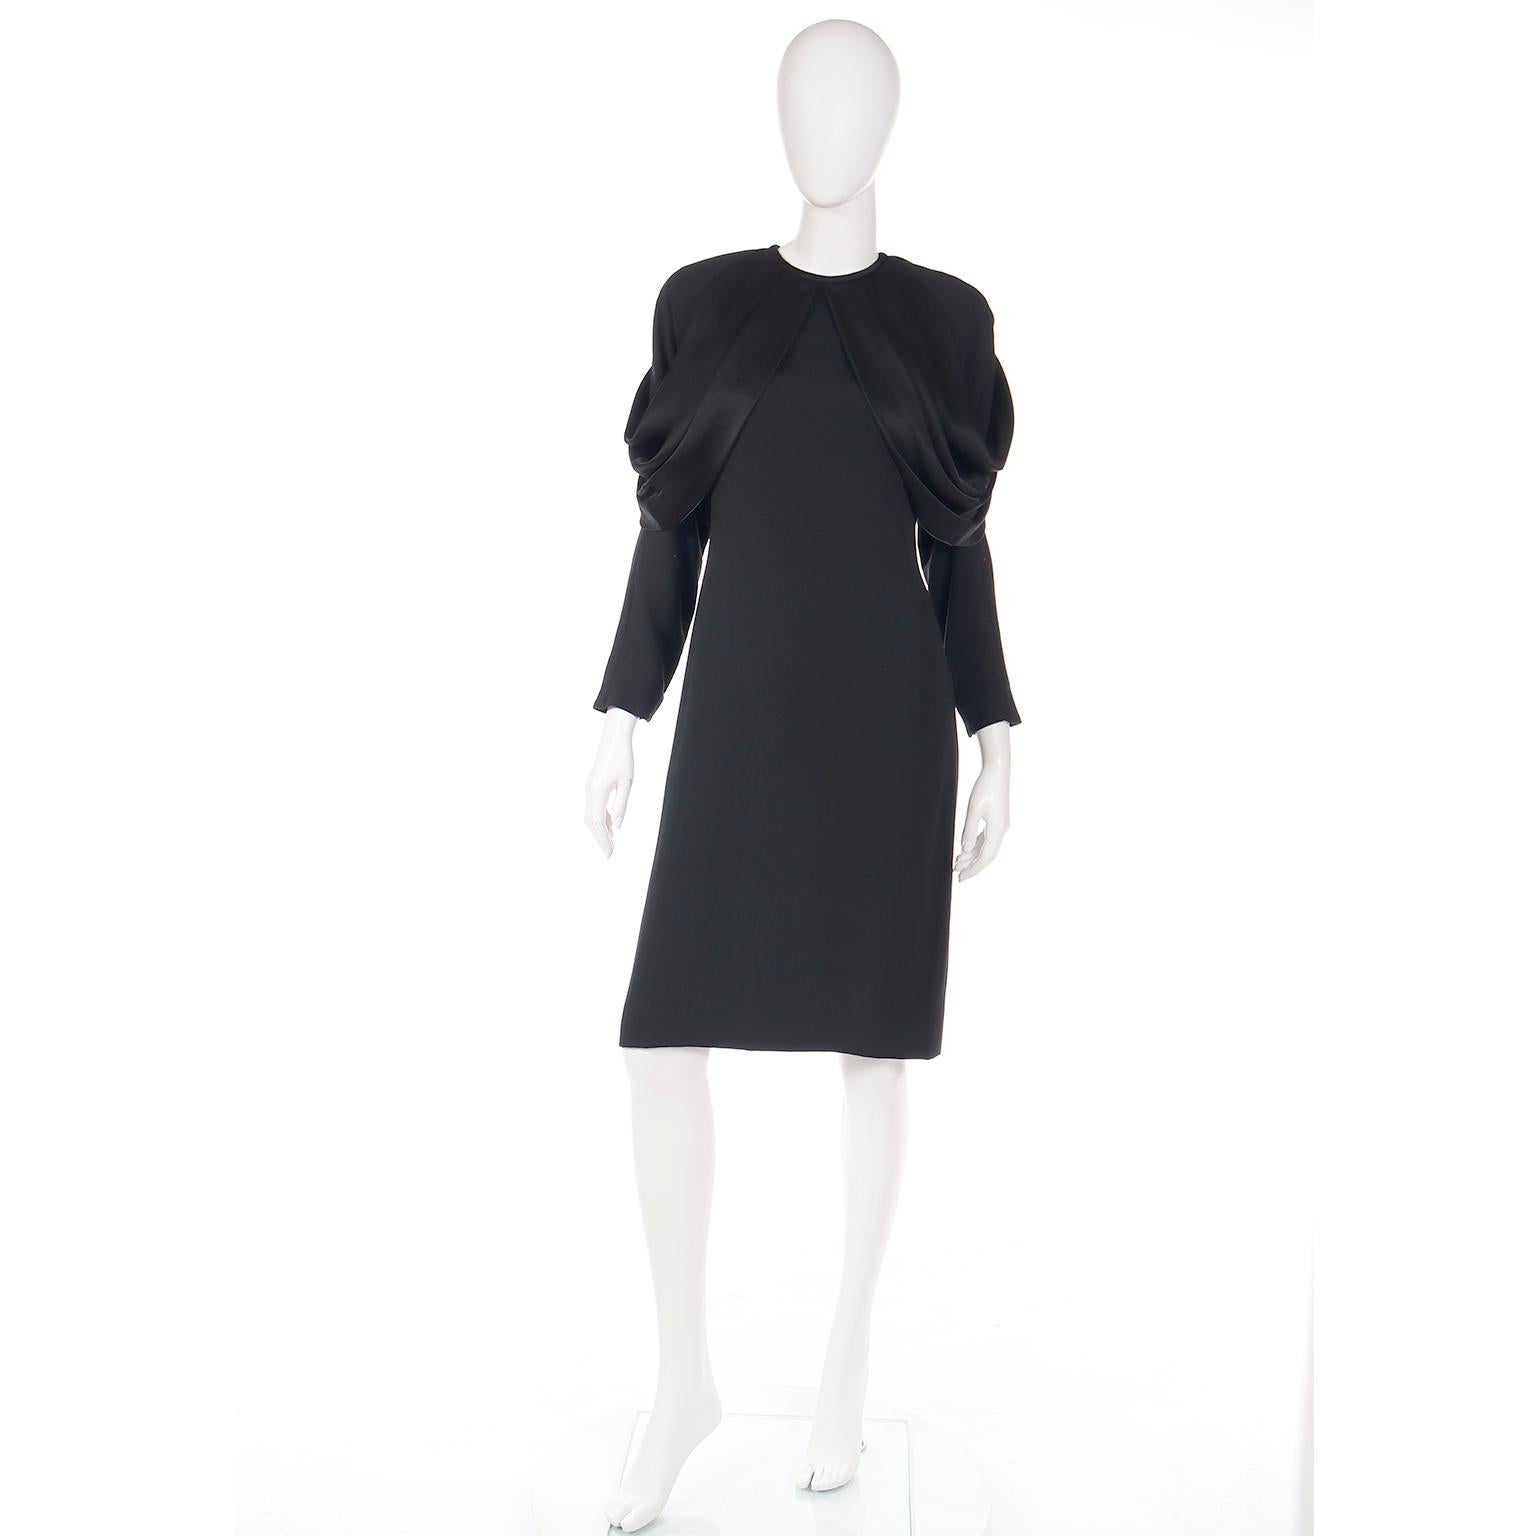 This 1980s little black dress by Adele Simpson has a gorgeous drape across each shoulder! It has long raglan sleeves with shoulder pads for structure, and two pieces of satin starting on either side of the center of the neckline, draping down across